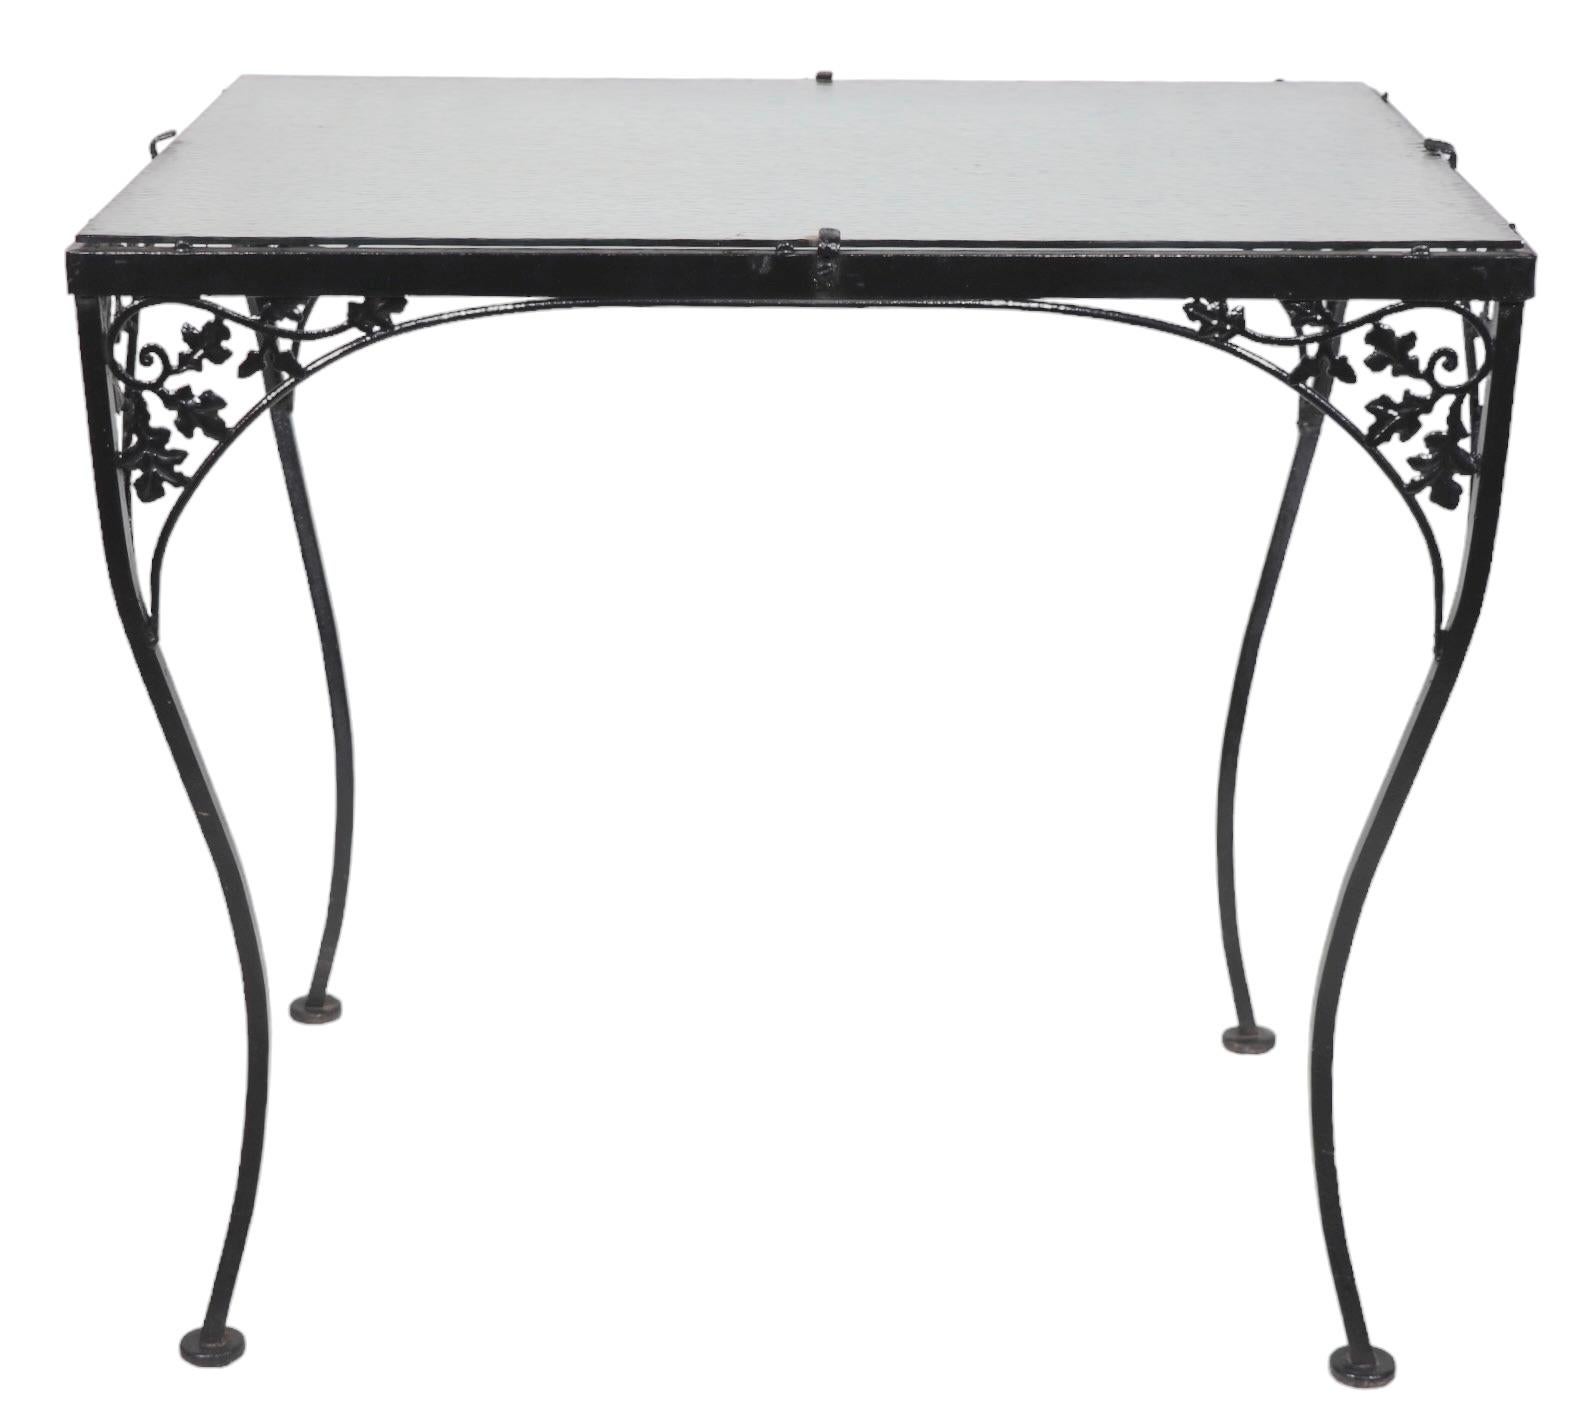 Ornate Wrought Iron and Glass Garden Patio Poolside Dining Table att. to Woodard For Sale 10